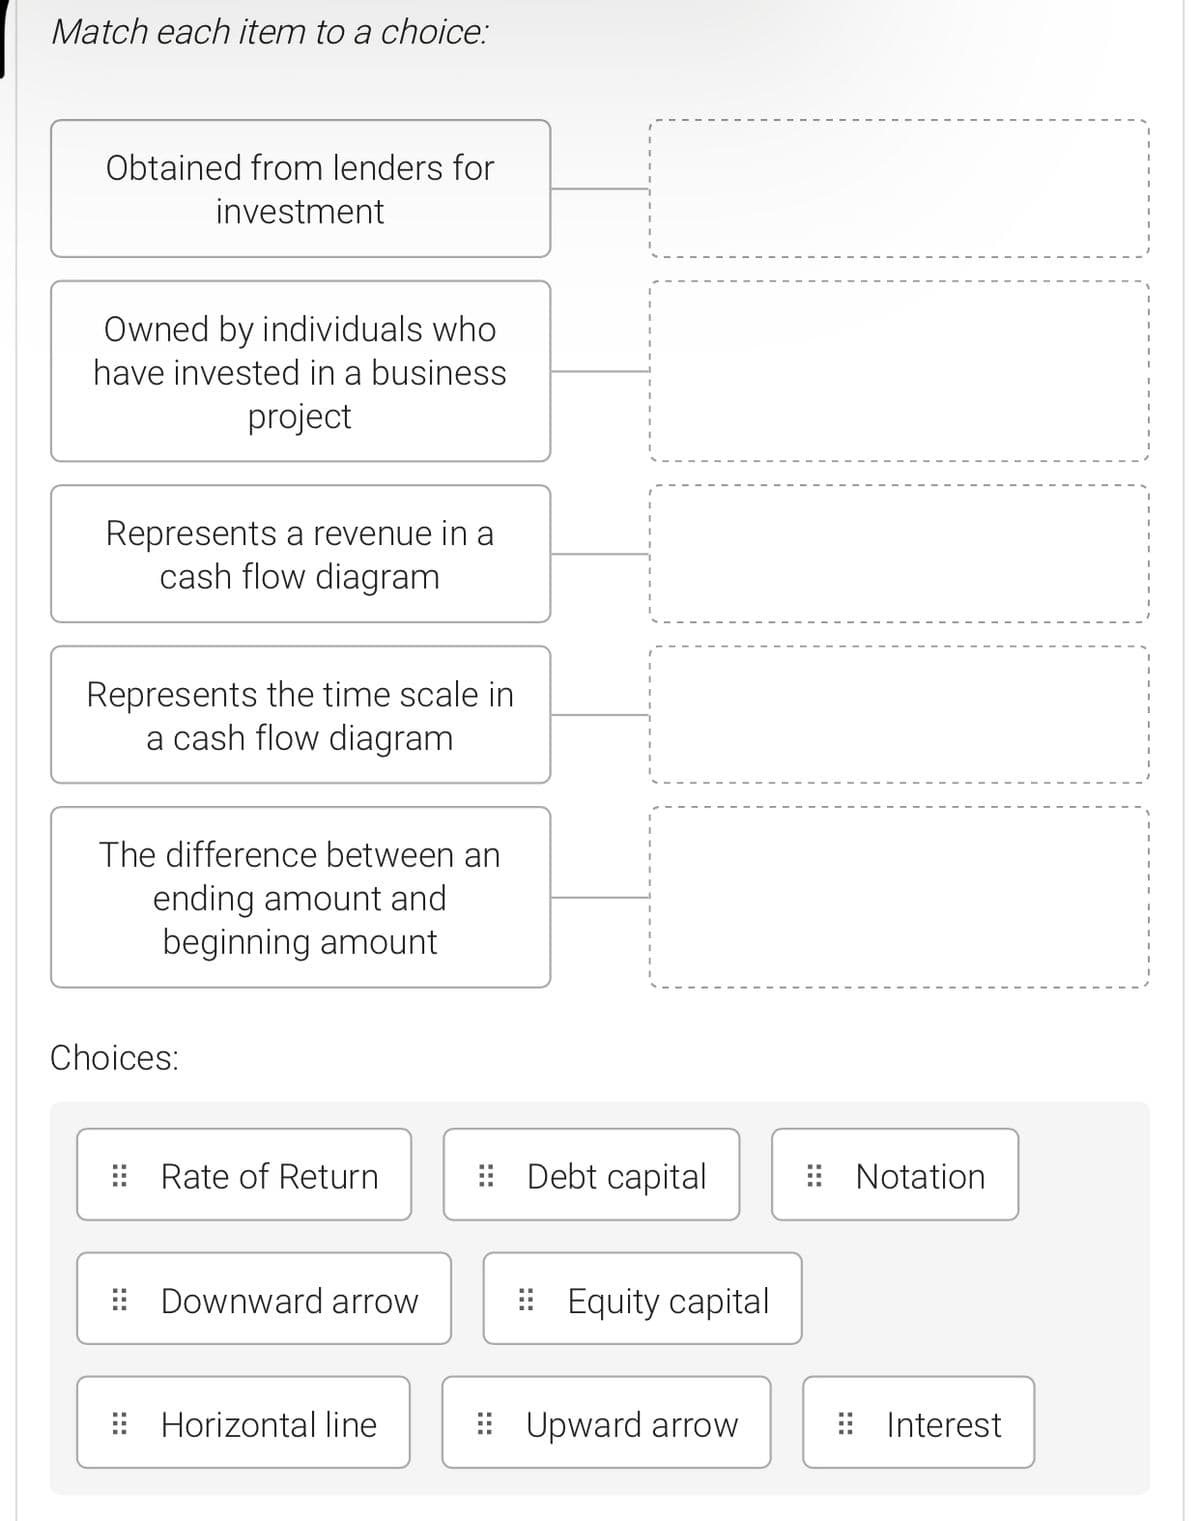 Match each item to a choice:
Obtained from lenders for
investment
Owned by individuals who
have invested in a business
project
Represents a revenue in a
cash flow diagram
Represents the time scale in
a cash flow diagram
The difference between an
ending amount and
beginning amount
Choices:
: Rate of Return
: Debt capital
: Notation
E Downward arrow
: Equity capital
: Horizontal line
: Upward arrow
E Interest
